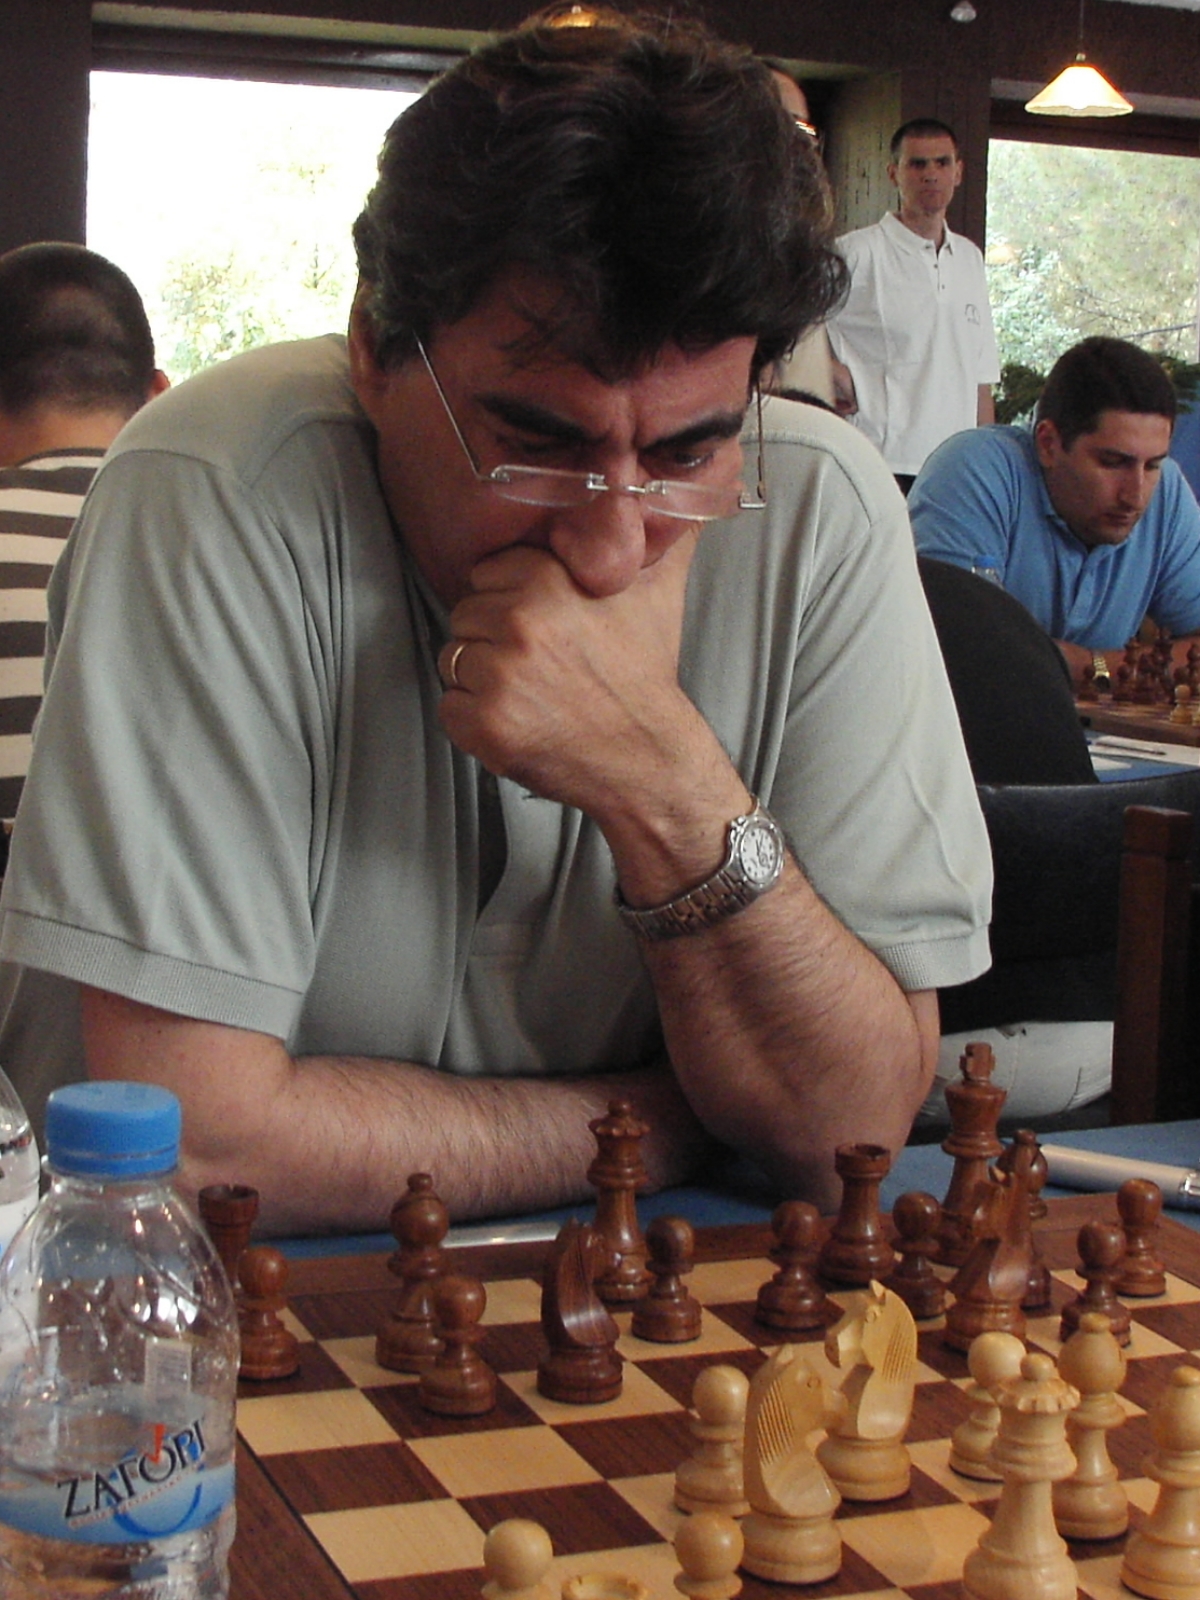 a man sitting at a table next to a chess board